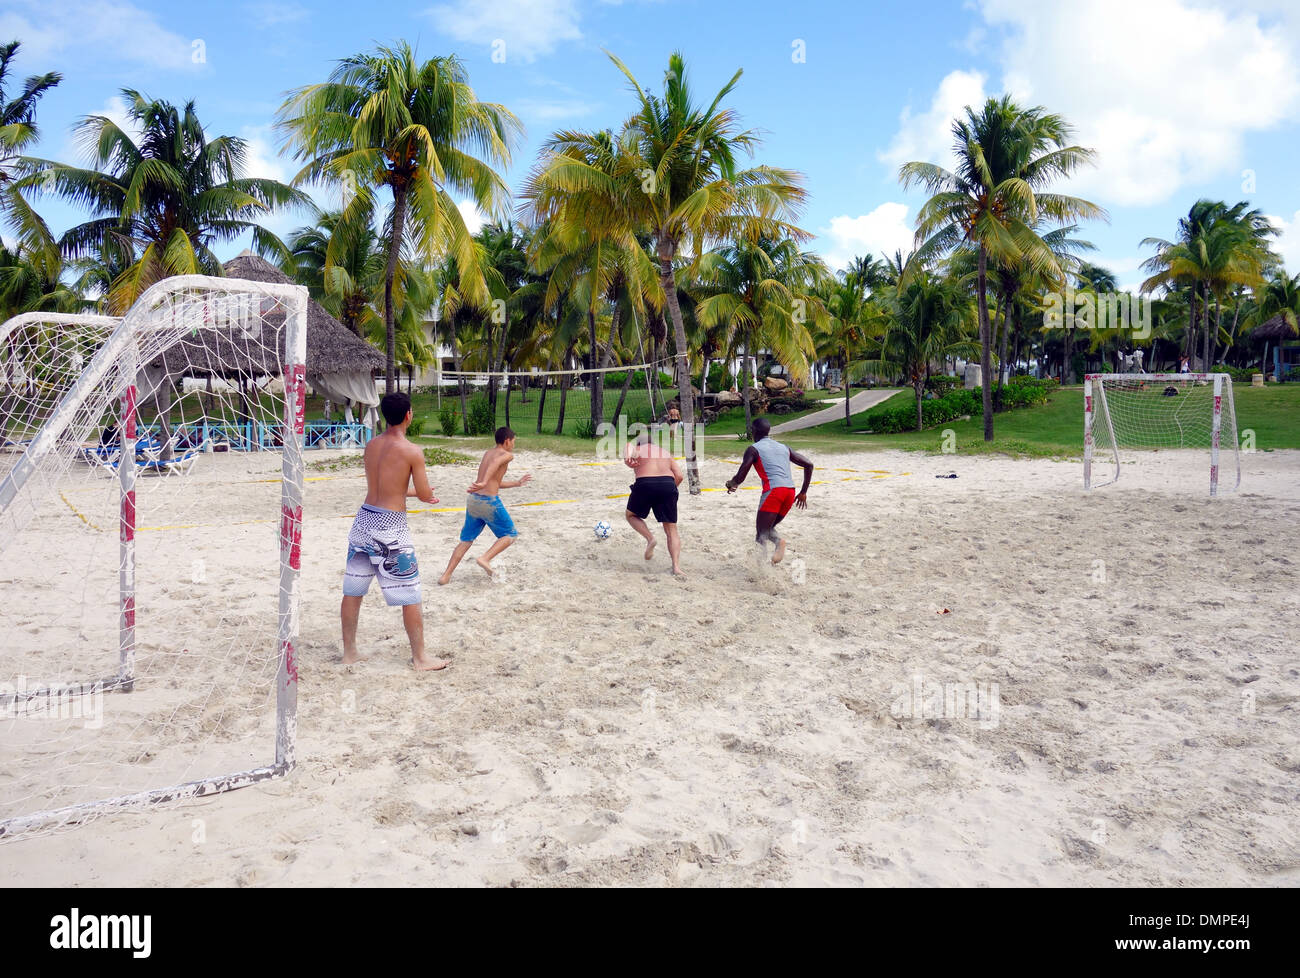 Young people playing soccer on a beach in Varadero, Cuba Stock Photo